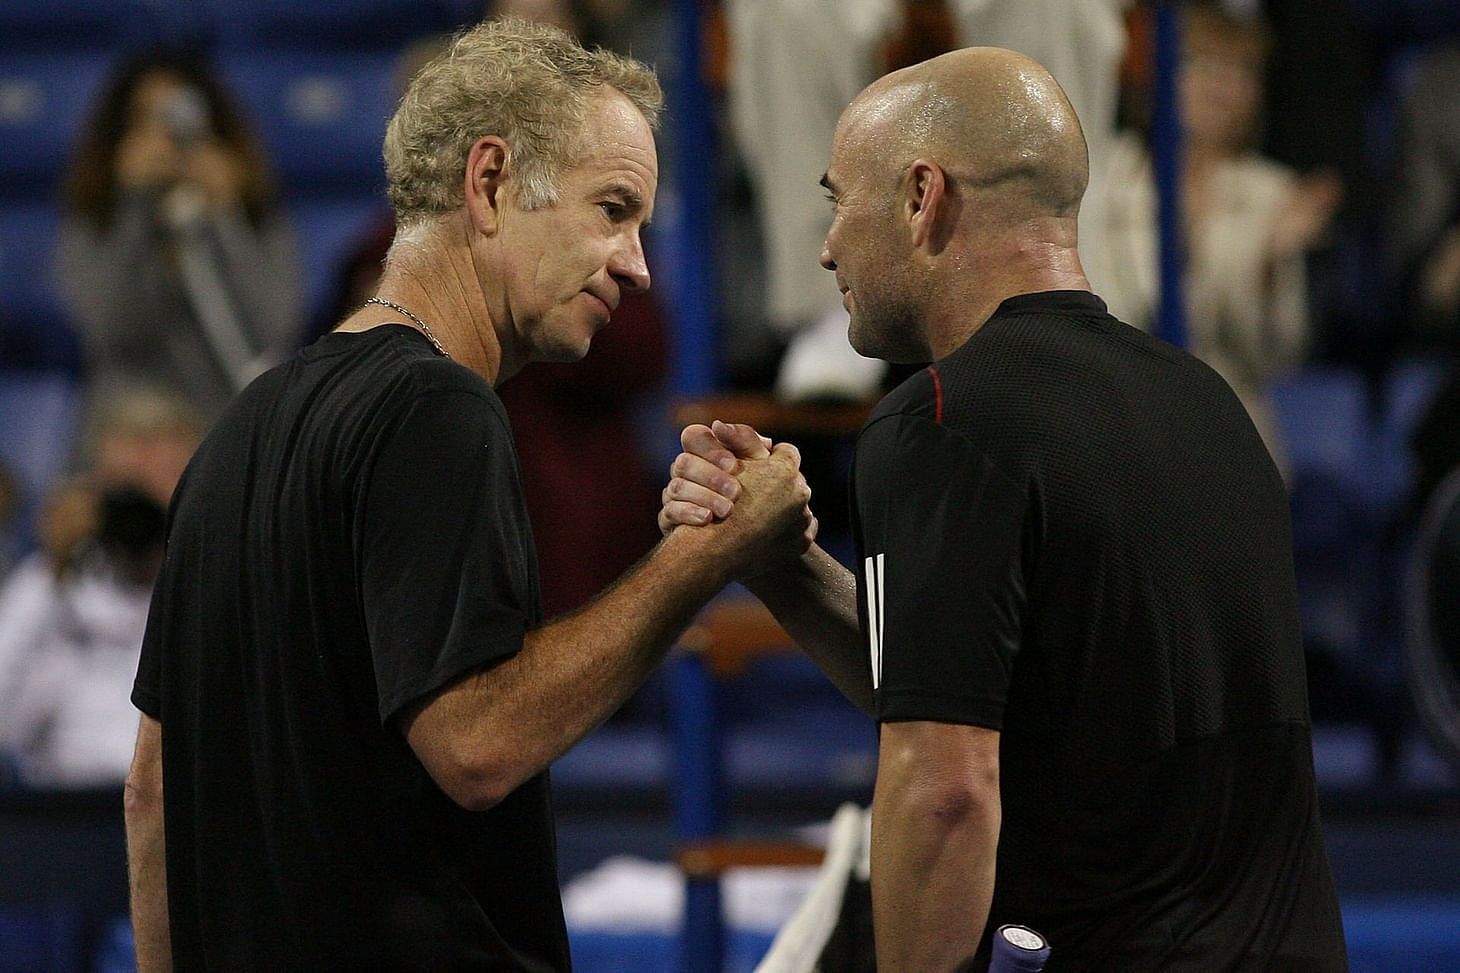 Andre Agassi and John McEnroe greet each other at the net